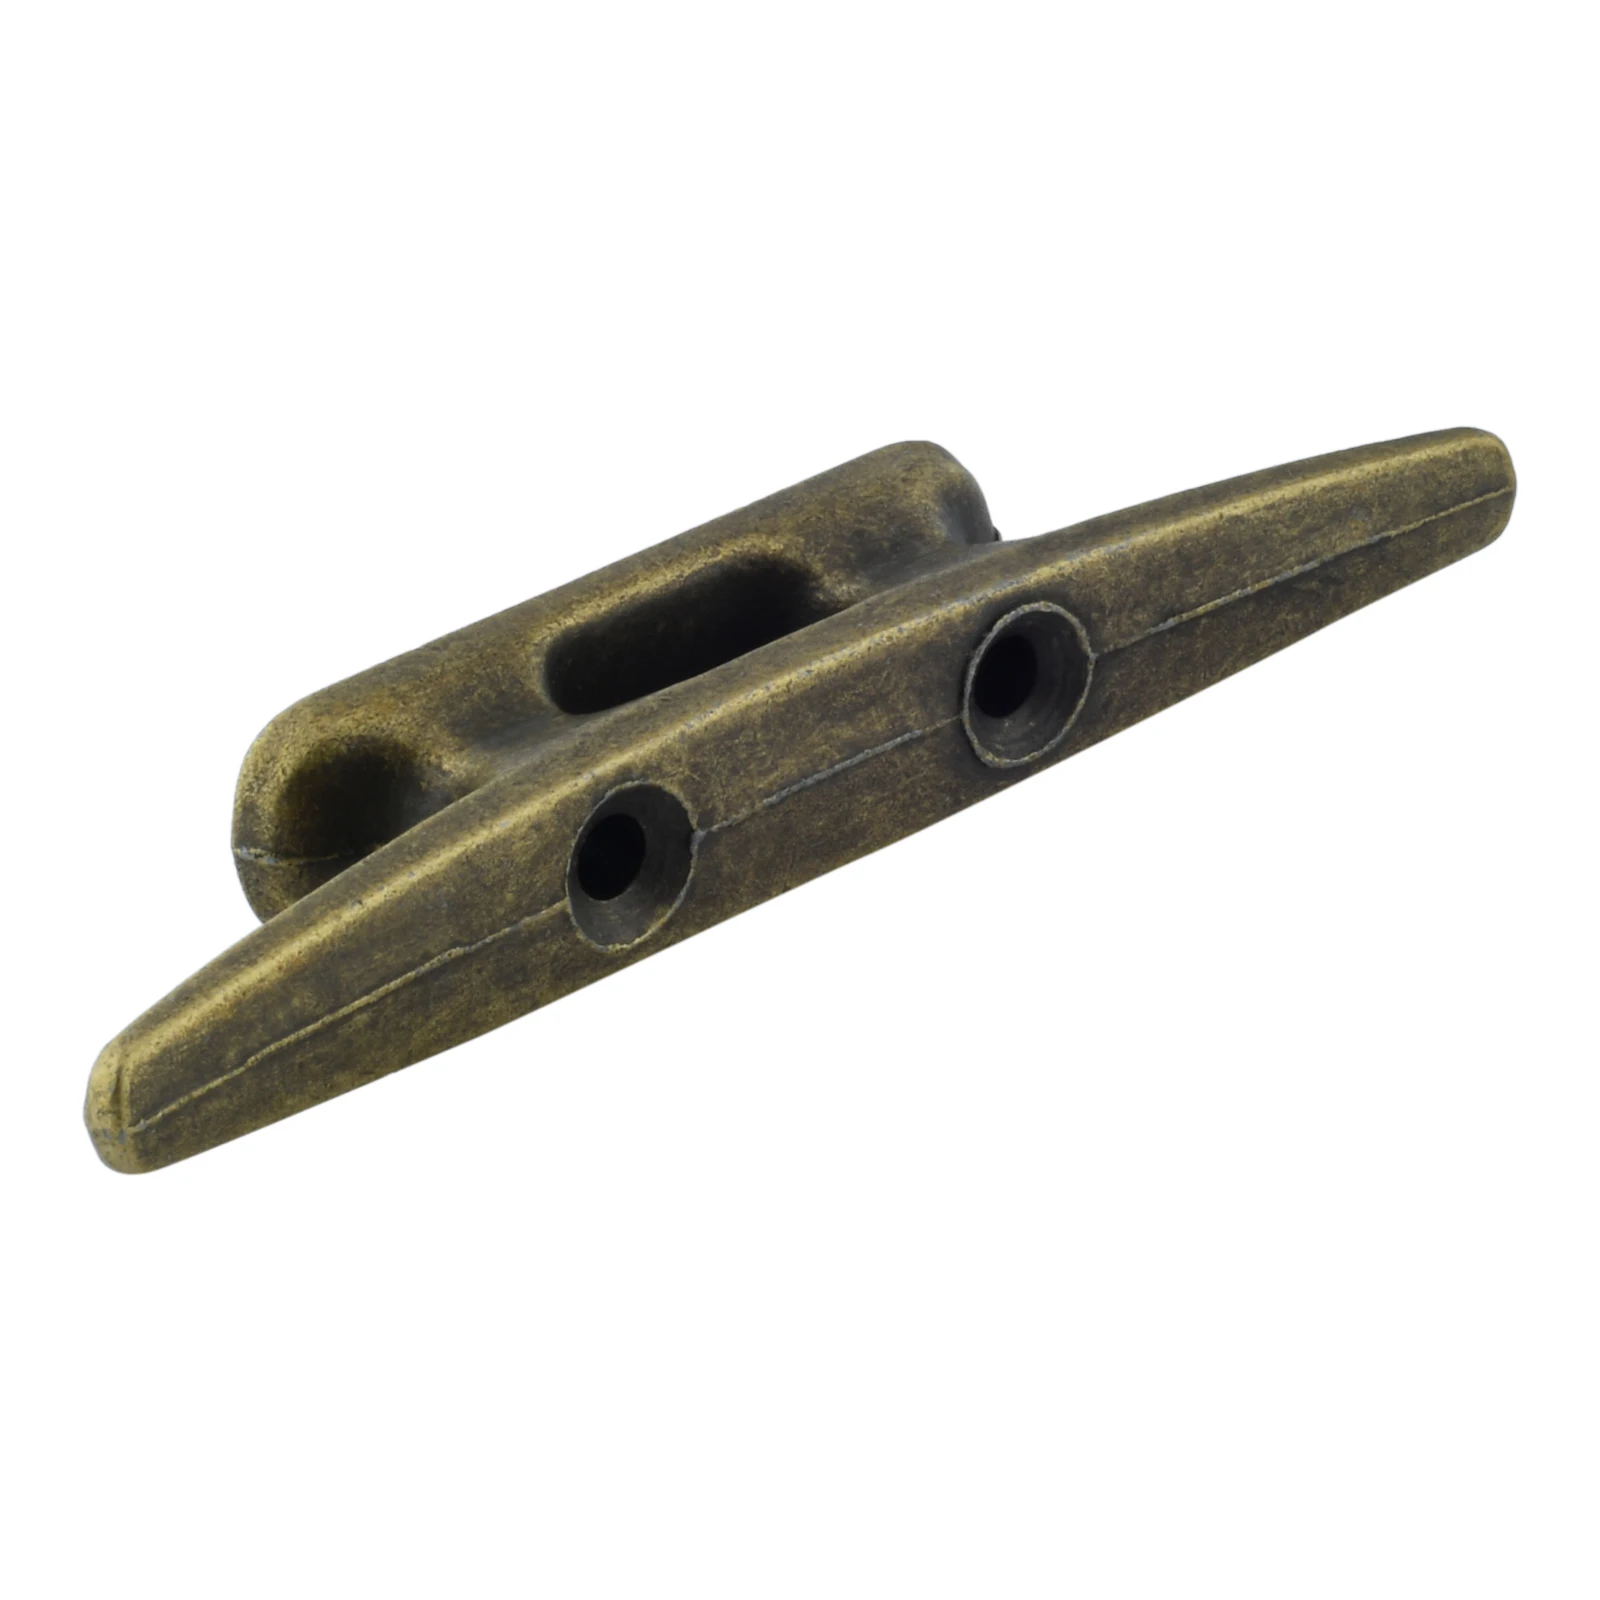 Cast Iron Antique Bronze Boat Dock Cleat 4 Inch Fit for Mooring Boat Nautical Beach Lake Marine Kayak Canoe Deck Cleats 99*13mm images - 6